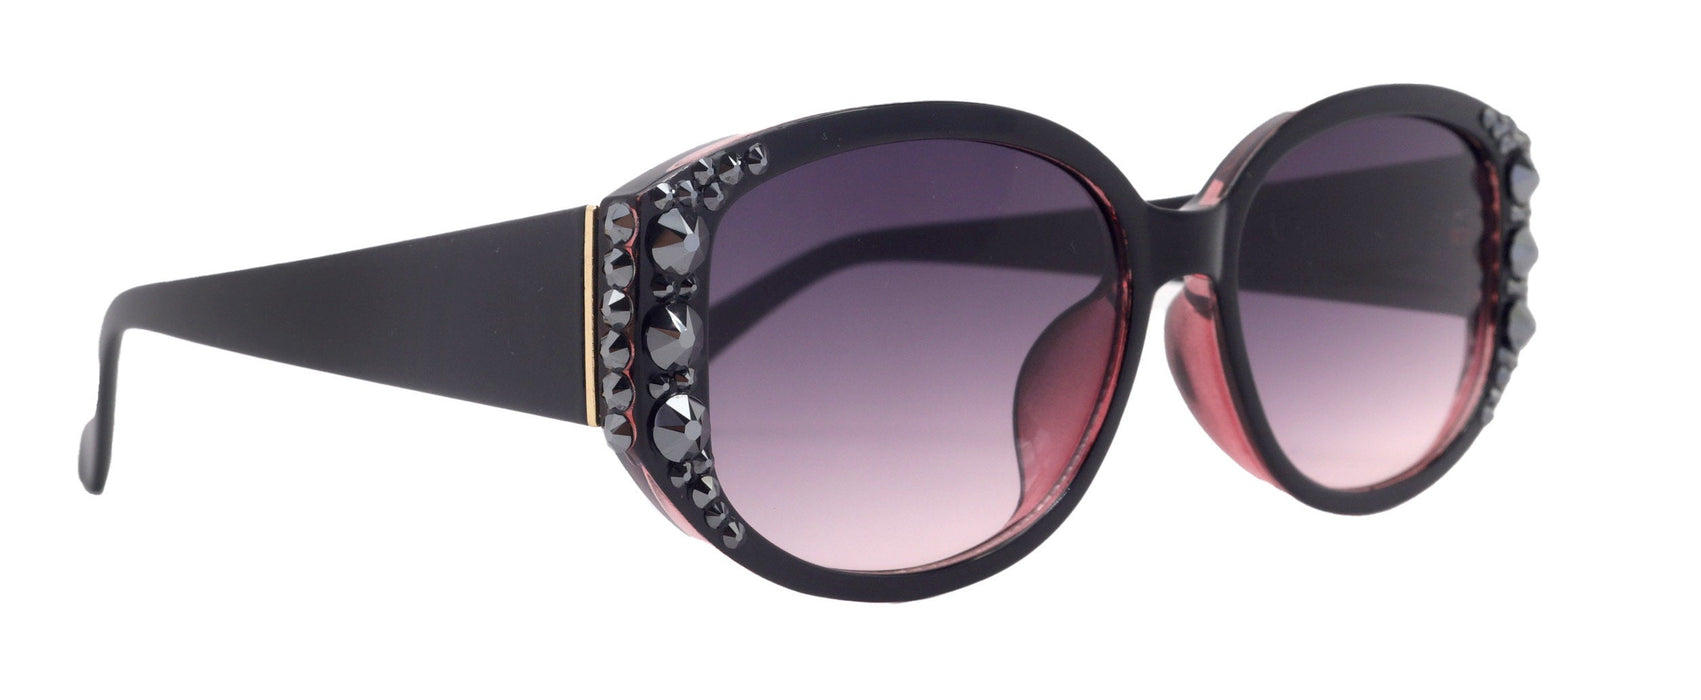 Bling Women Sunglasses W Hematite and Genuine European Crystals, 100% UV Protection. NY Fifth Avenue